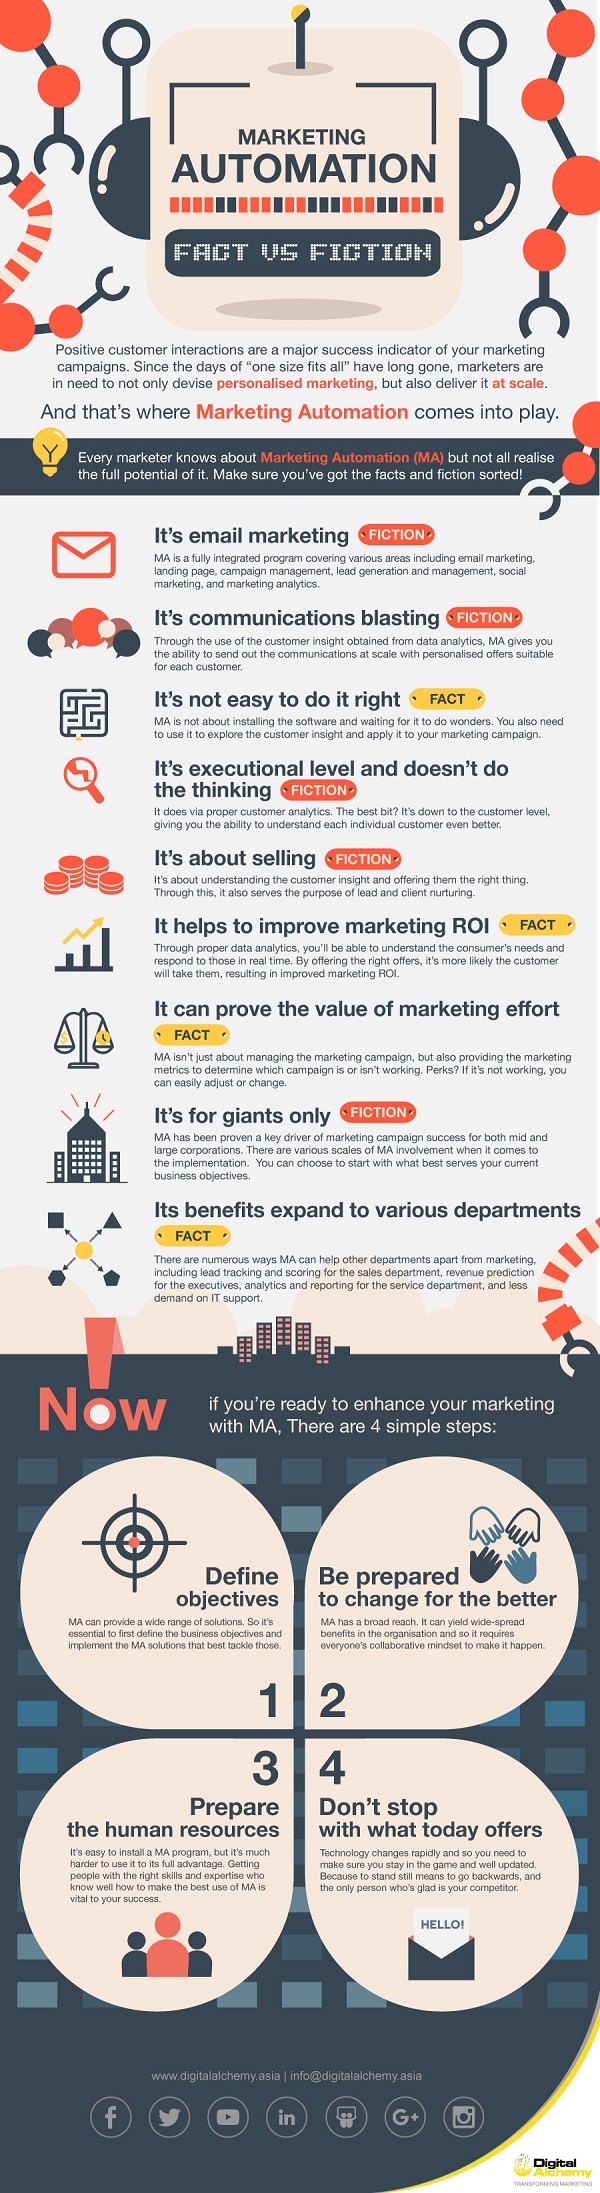 da_infographic_marketing_automation_v4asia_withoutabout